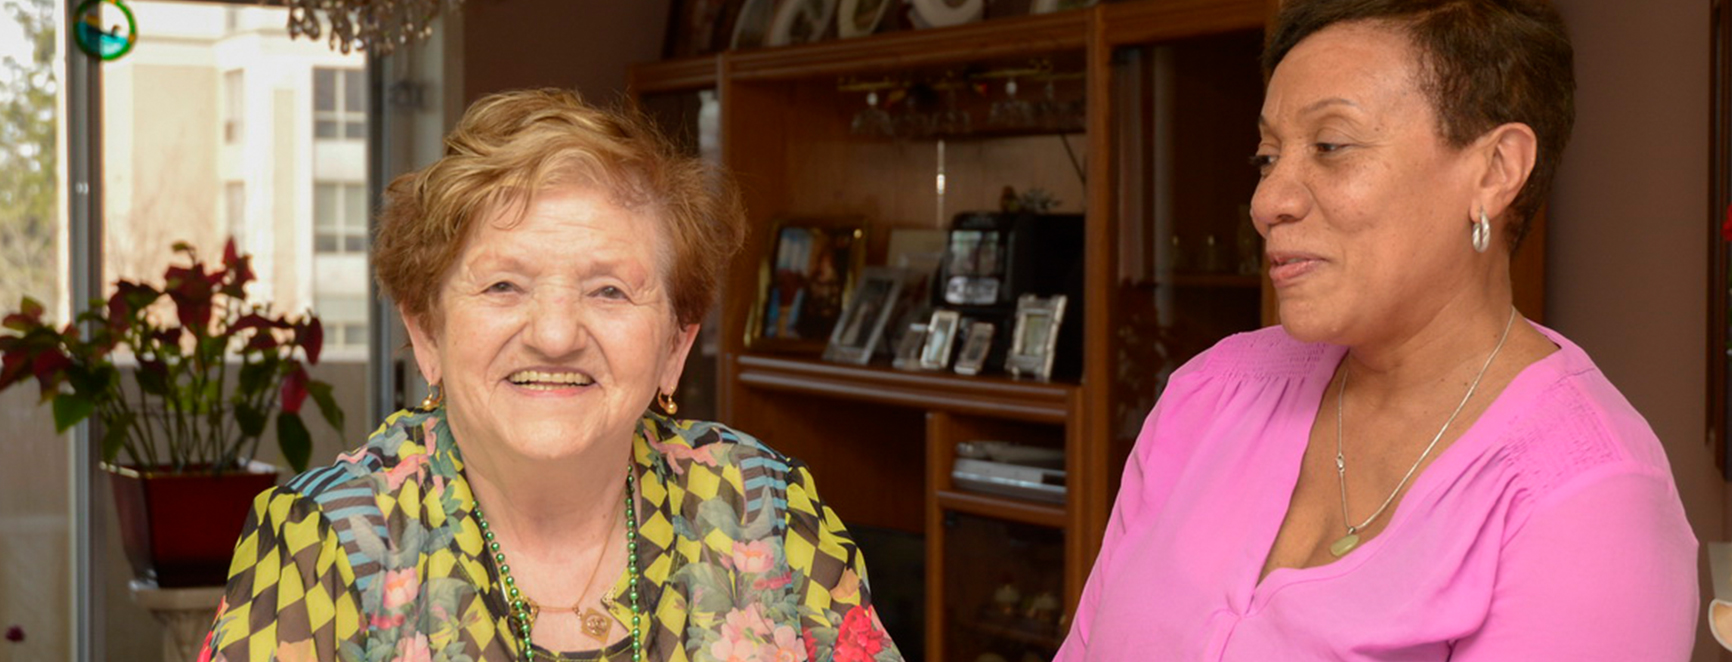 Two women in a residential home